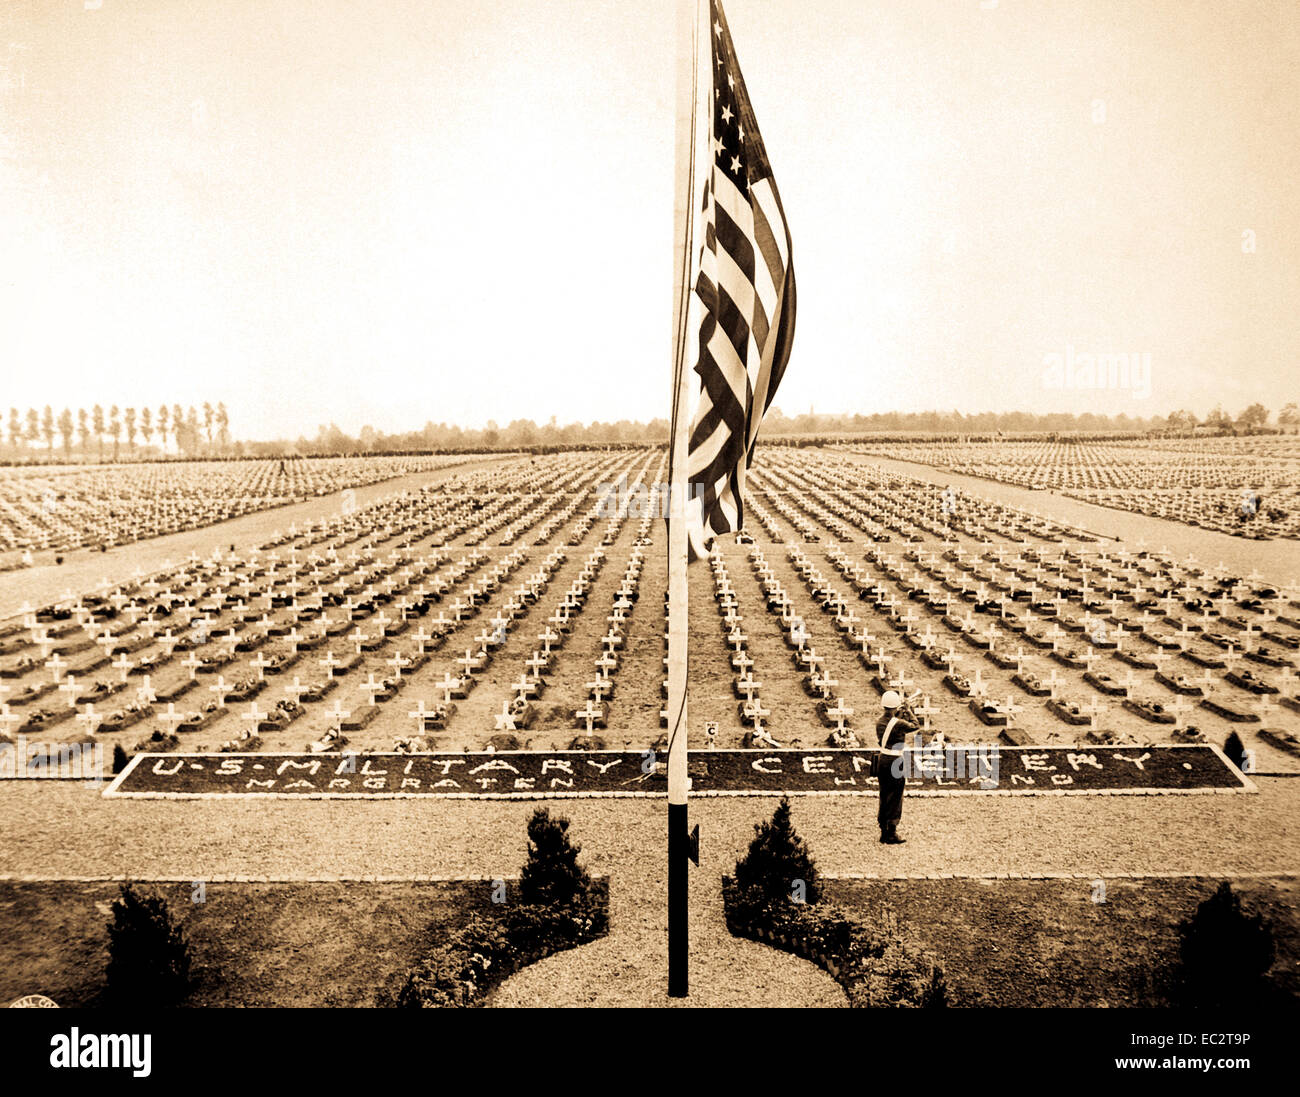 A bugler blow taps at the close of Memorial Day service at Margraten Cemetery, Holland, where lie thousands of American heroes of World War II.  May 30, 1945. Stock Photo